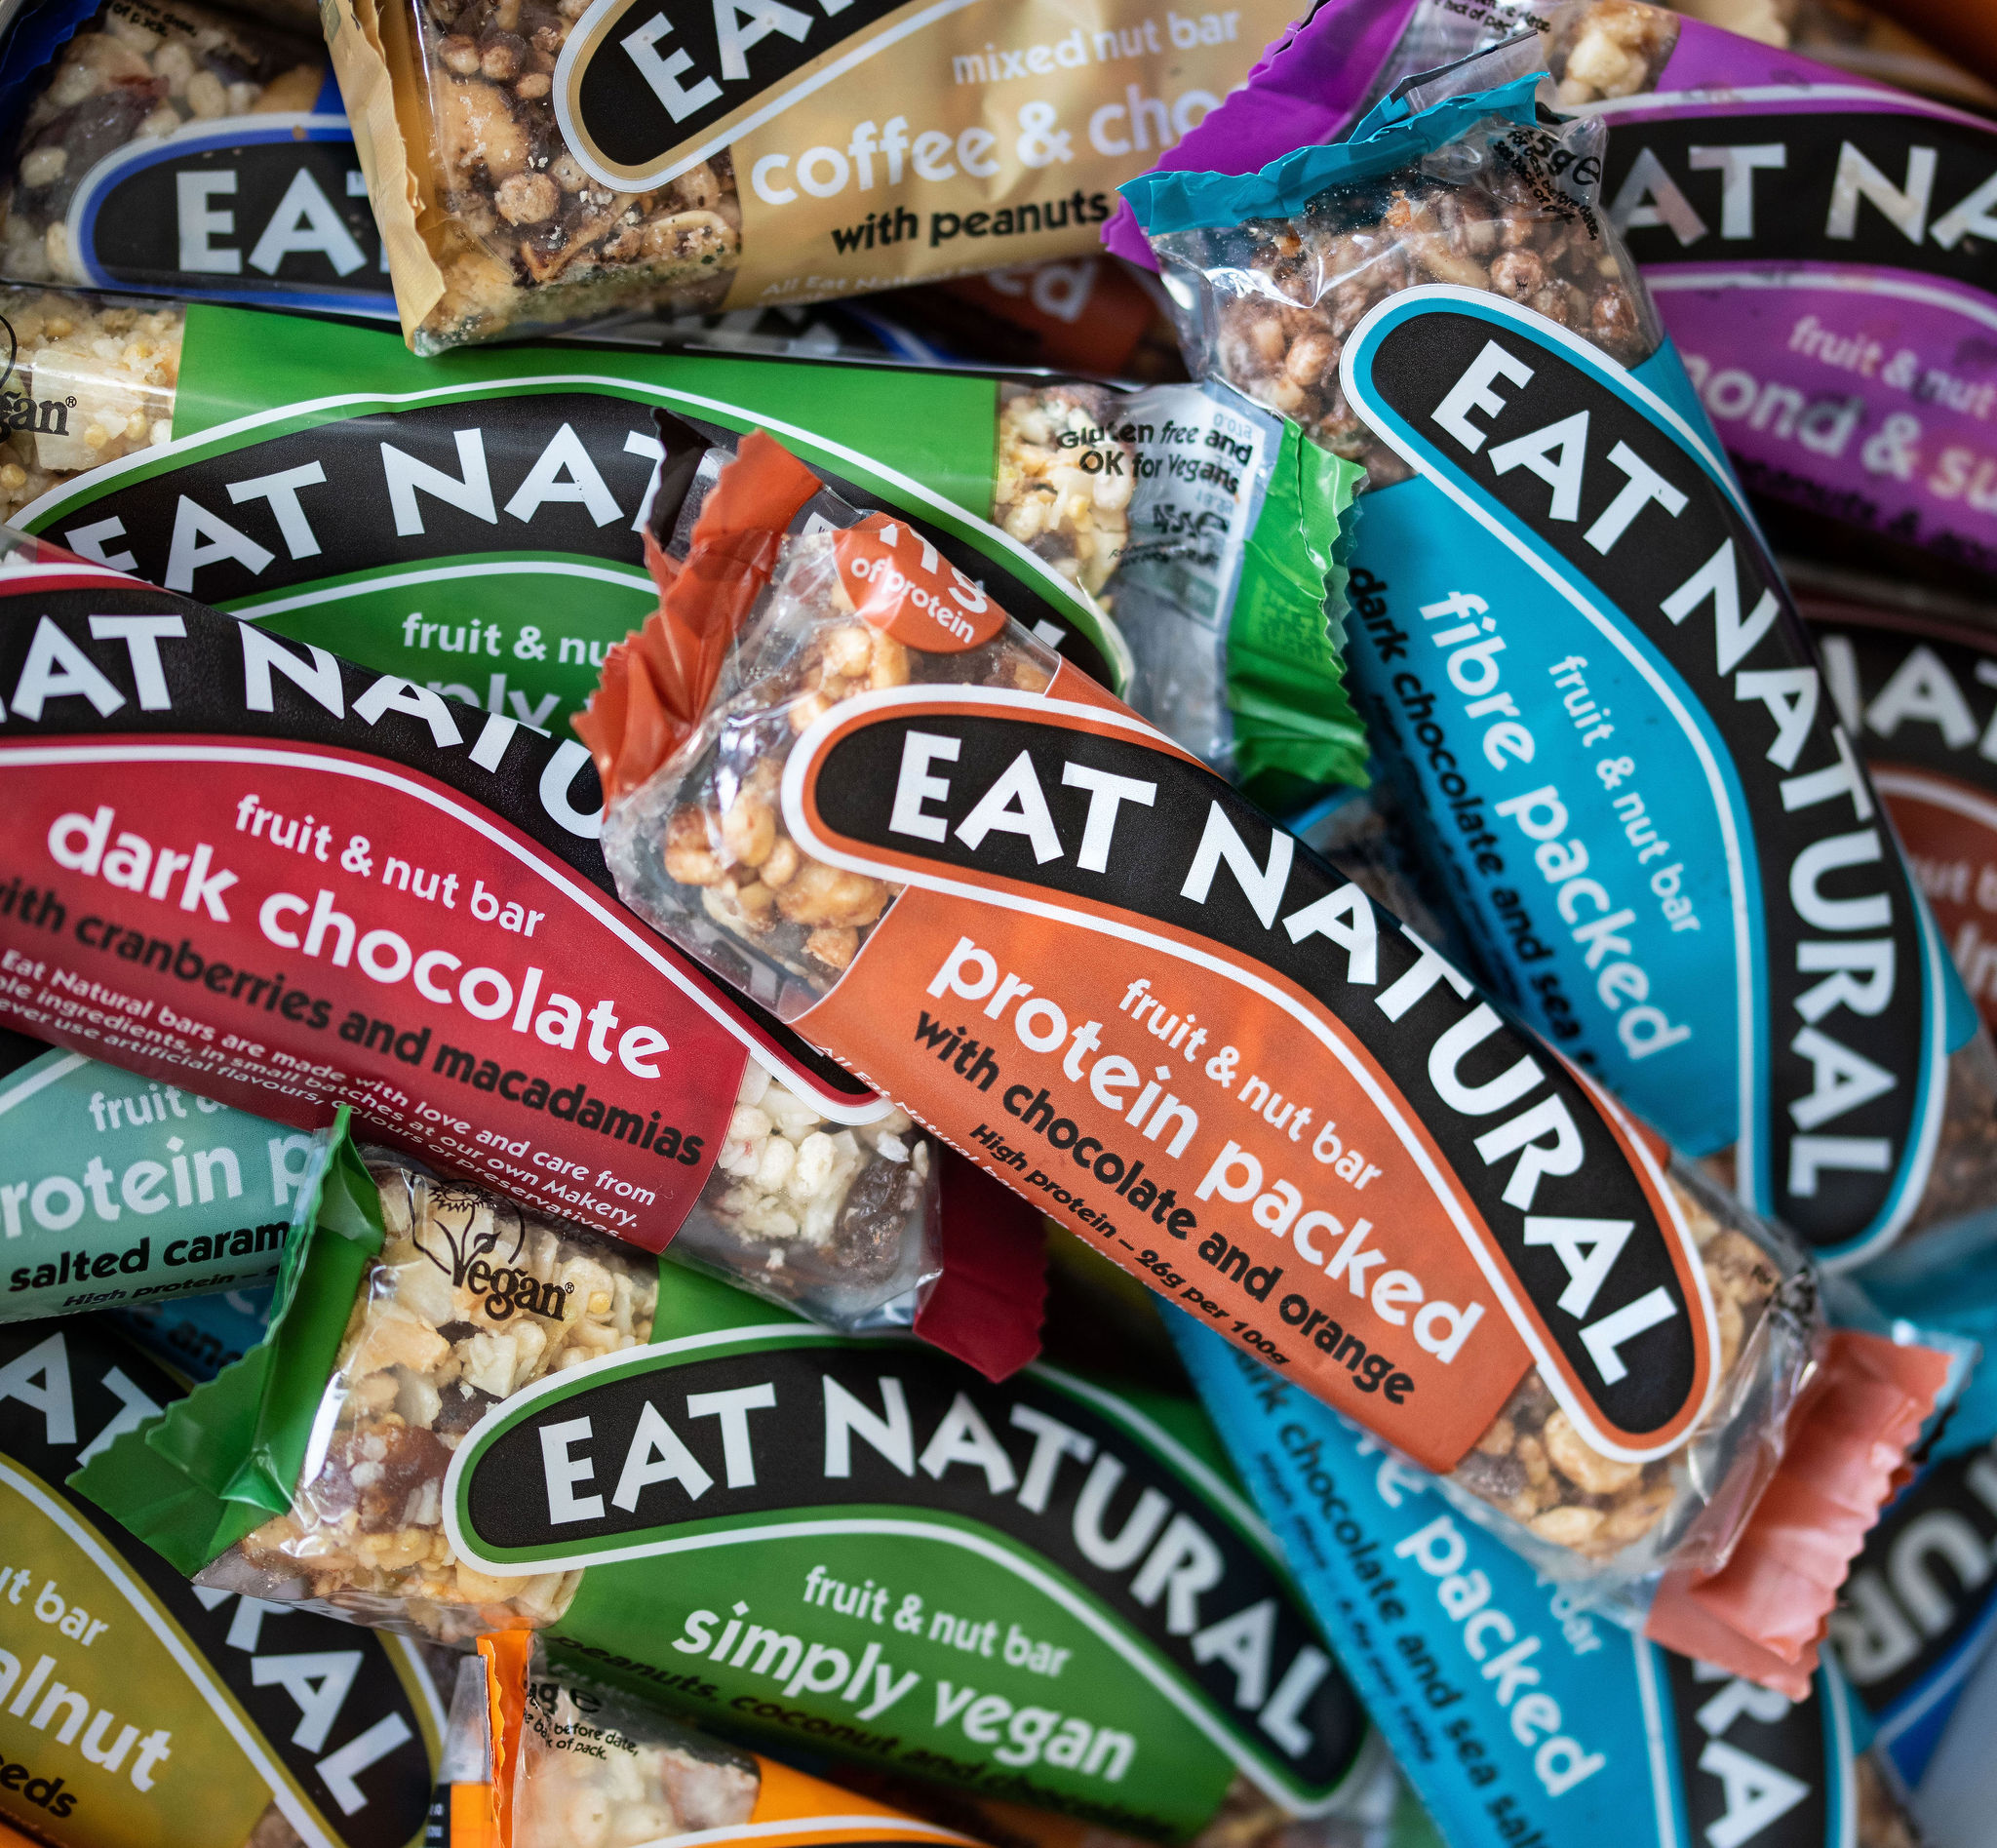 Epicurium expands snacking range with Pipers, Eat Natural